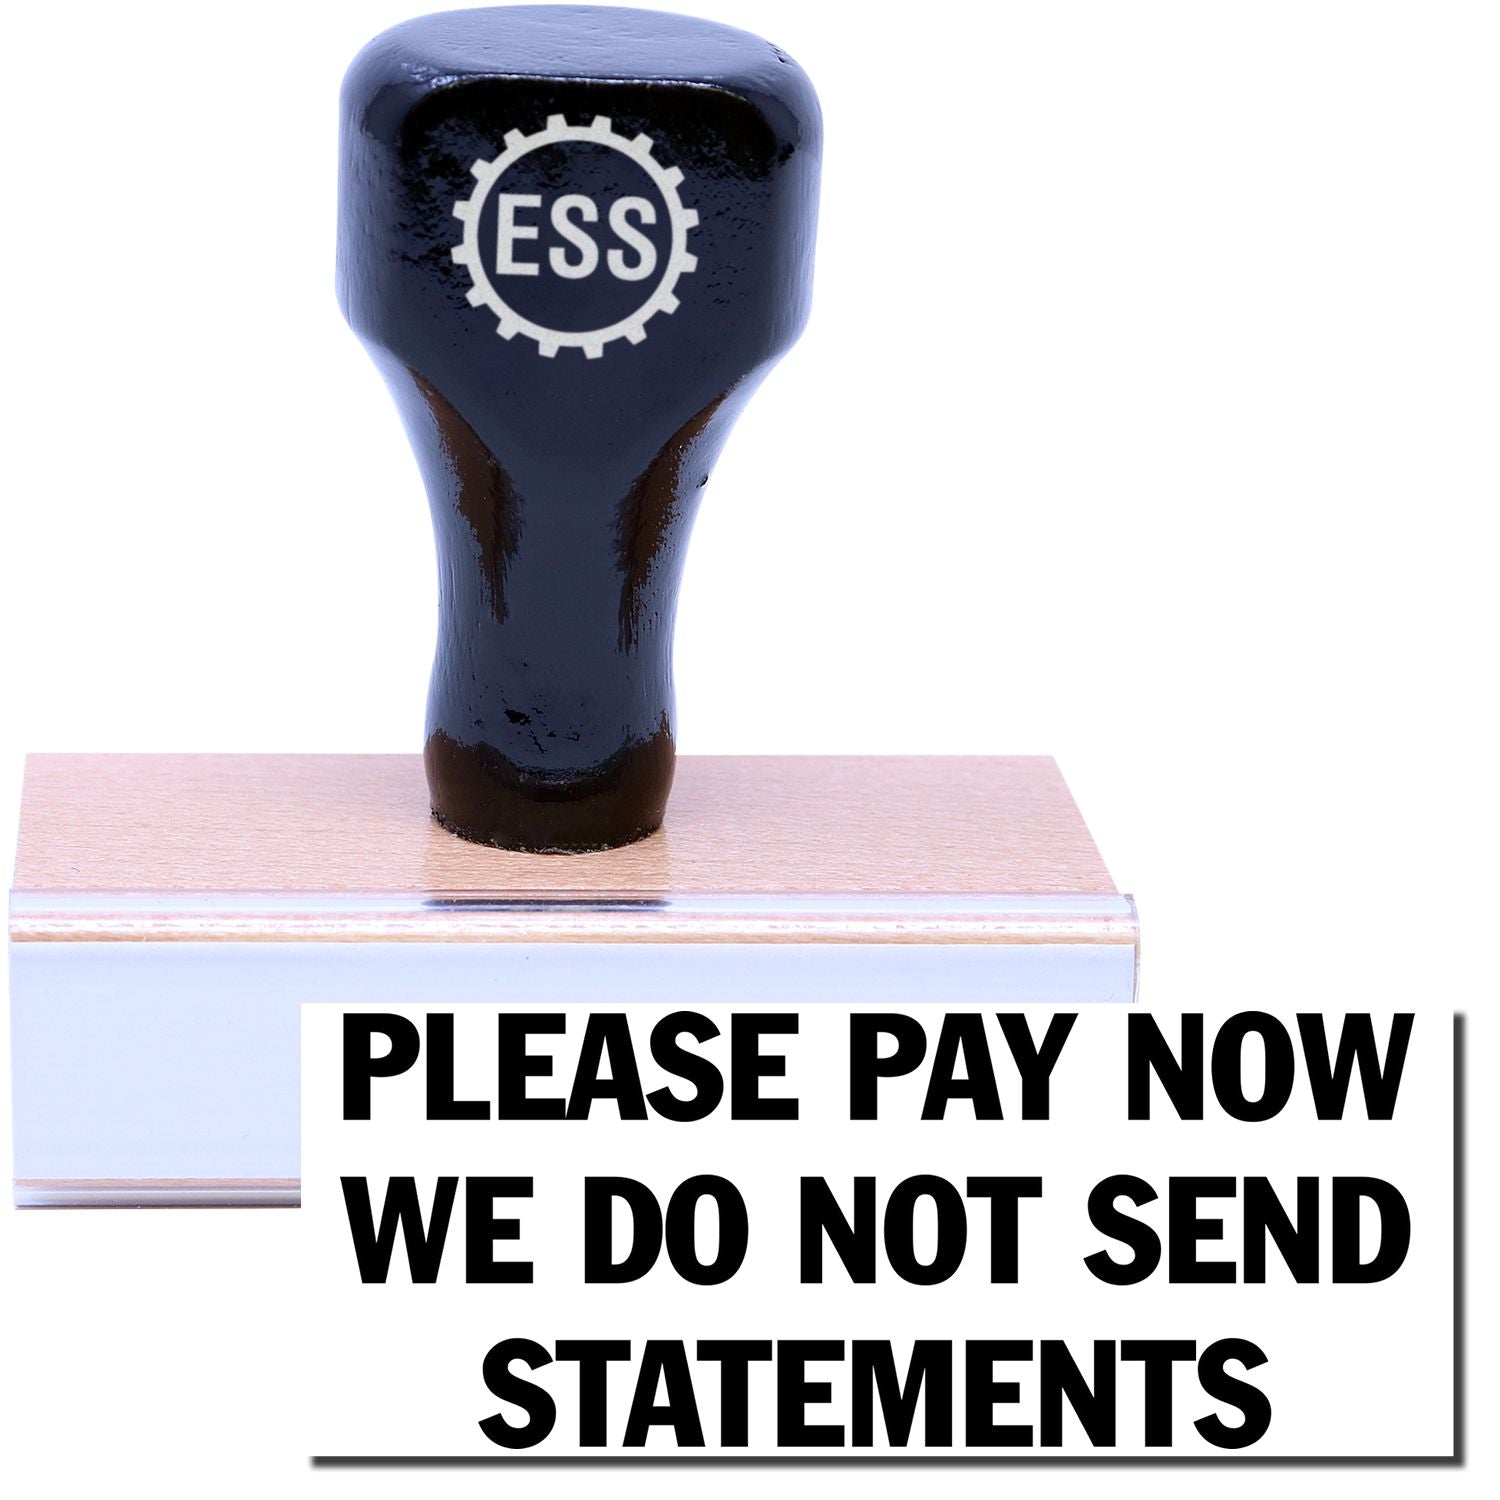 A stock office rubber stamp with a stamped image showing how the text "PLEASE PAY NOW WE DO NOT SEND STATEMENTS" is displayed after stamping.